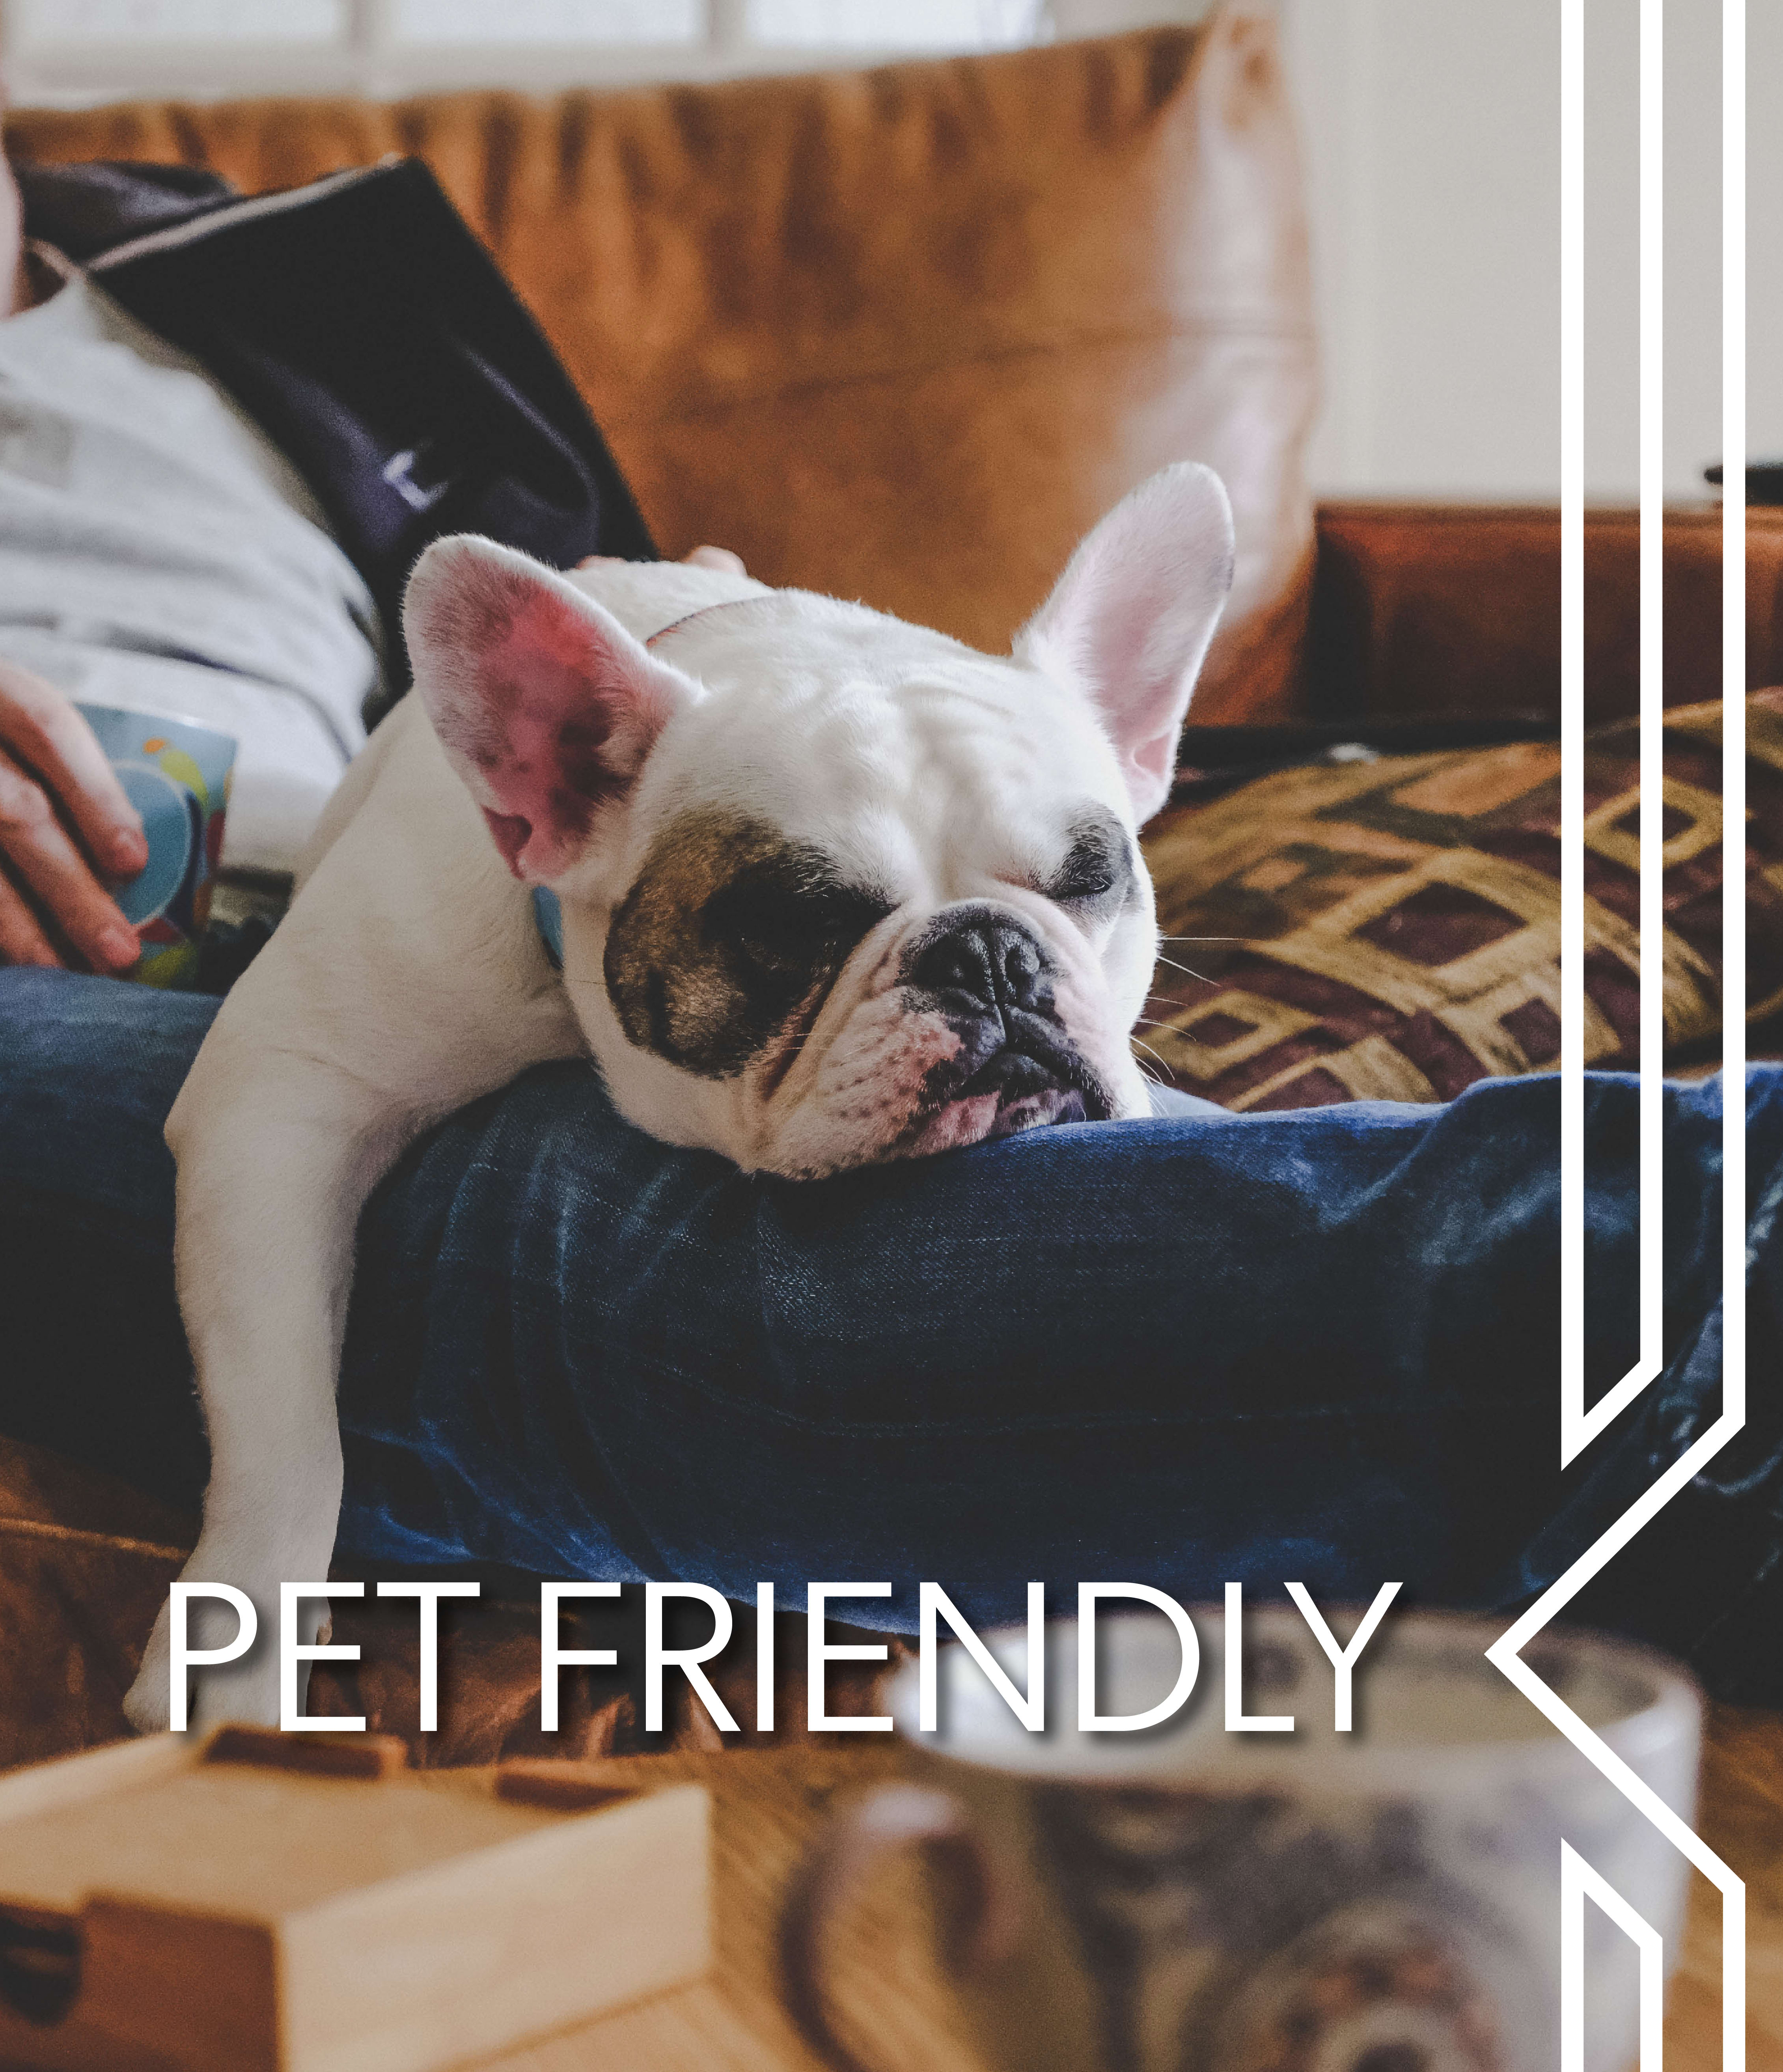 View our pet policy at Ridgecrest in Denton, Texas